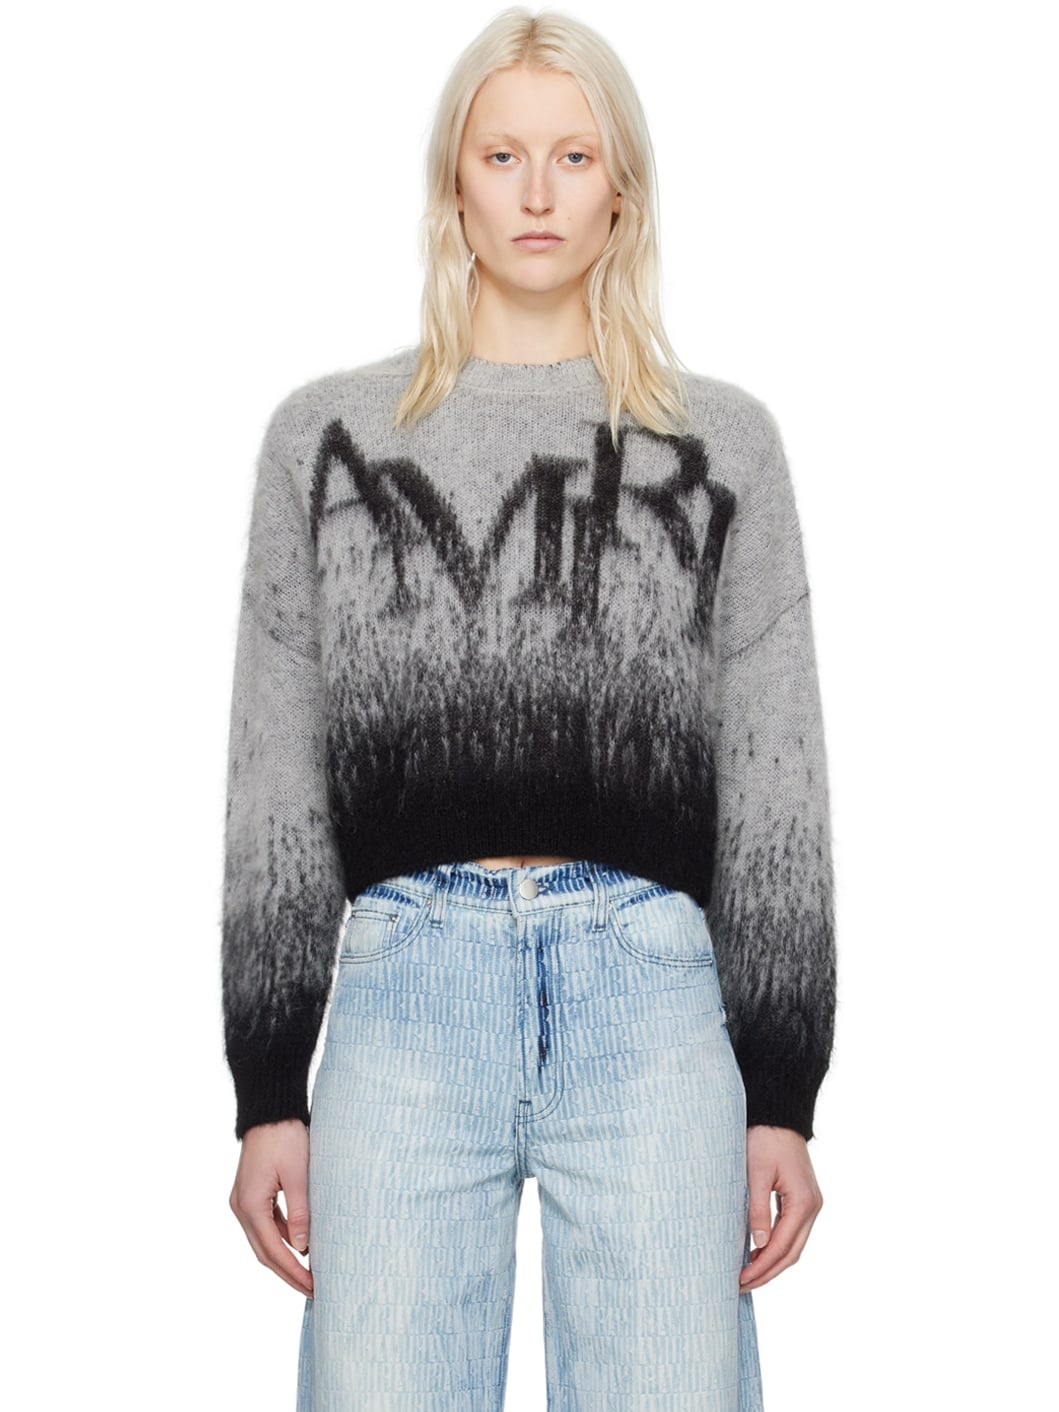 Gray Staggered Ombre Sweater - 1